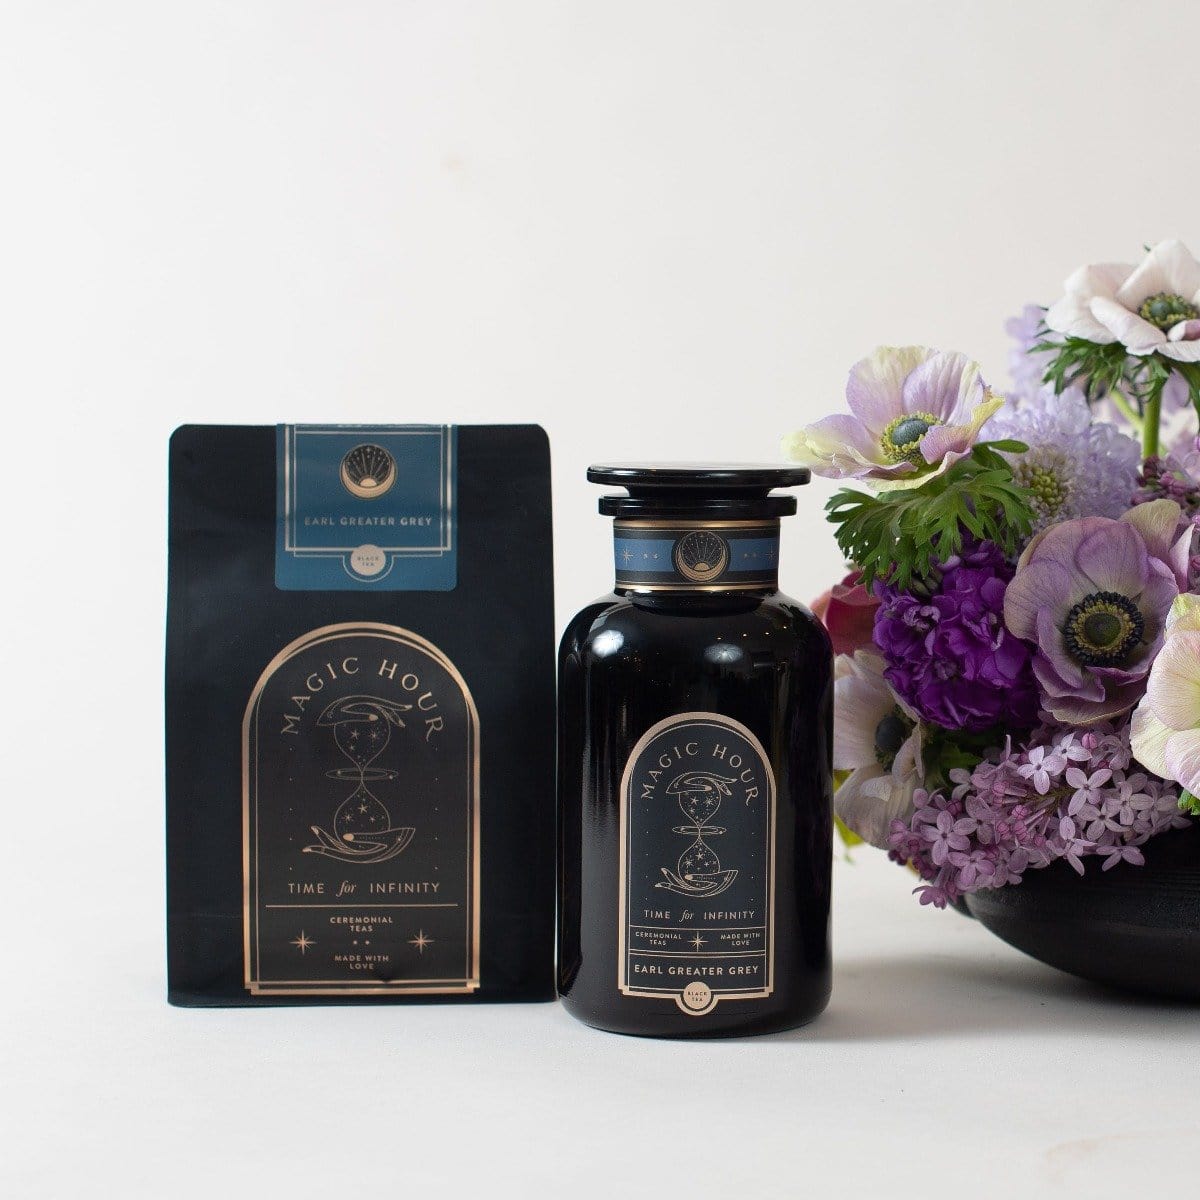 A black bag and a black jar of Magic Hour's "Earl Greater Grey: Tea for the Bright & Bold" loose leaf tea are placed next to a vase containing a bouquet of flowers with purple, white, and pink blooms. The packaging, which highlights the organic tea blend, features gold and white text with a mystical design.